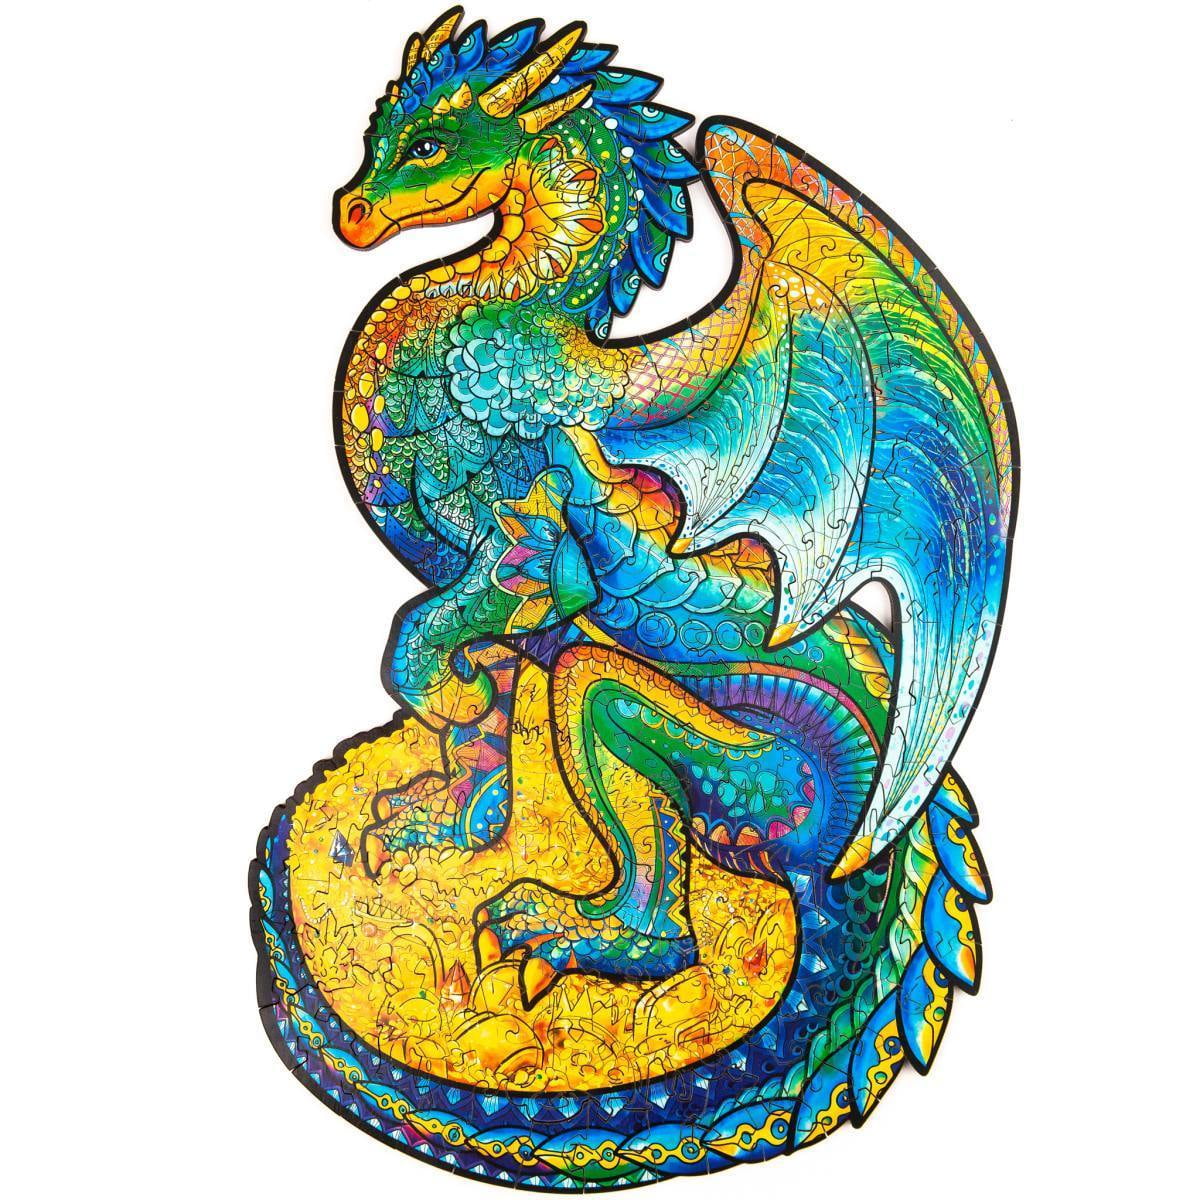 2000 Piece Jigsaw Puzzle for Adults and Families Dragon Puzzles for Adults Jigsaw Puzzles 2000 Pieces for Adults Puzzle Unique Birthday Present Suitable for Teenagers and Adults